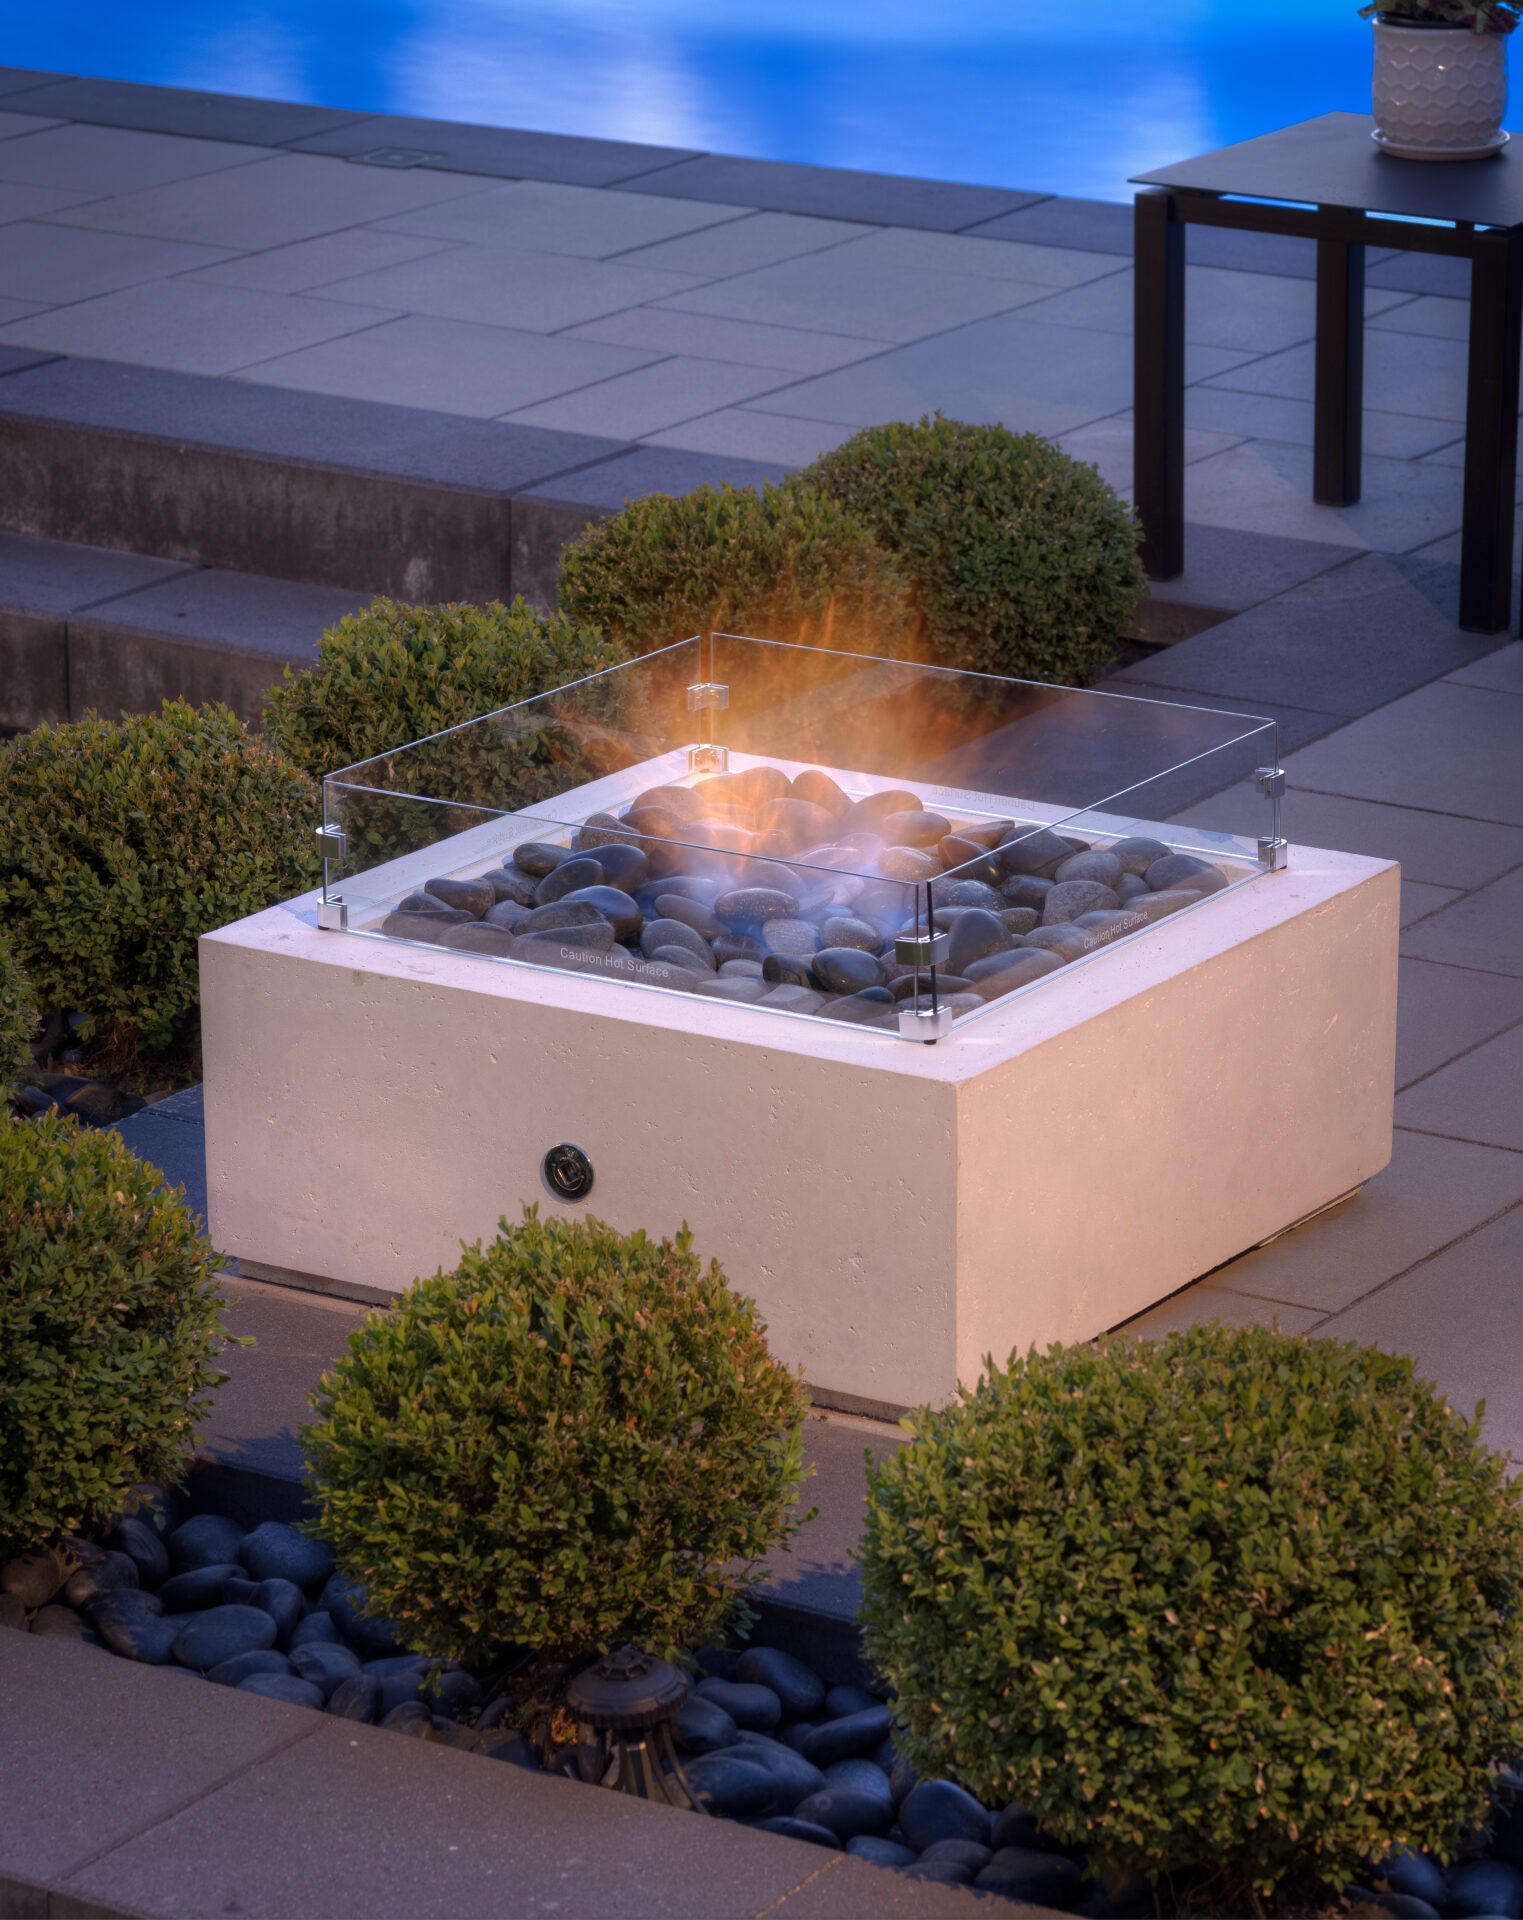 An outdoor gas fire pit with glass wind guard surrounded by dark stones and green shrubbery, adjacent to a patio table, at dusk.